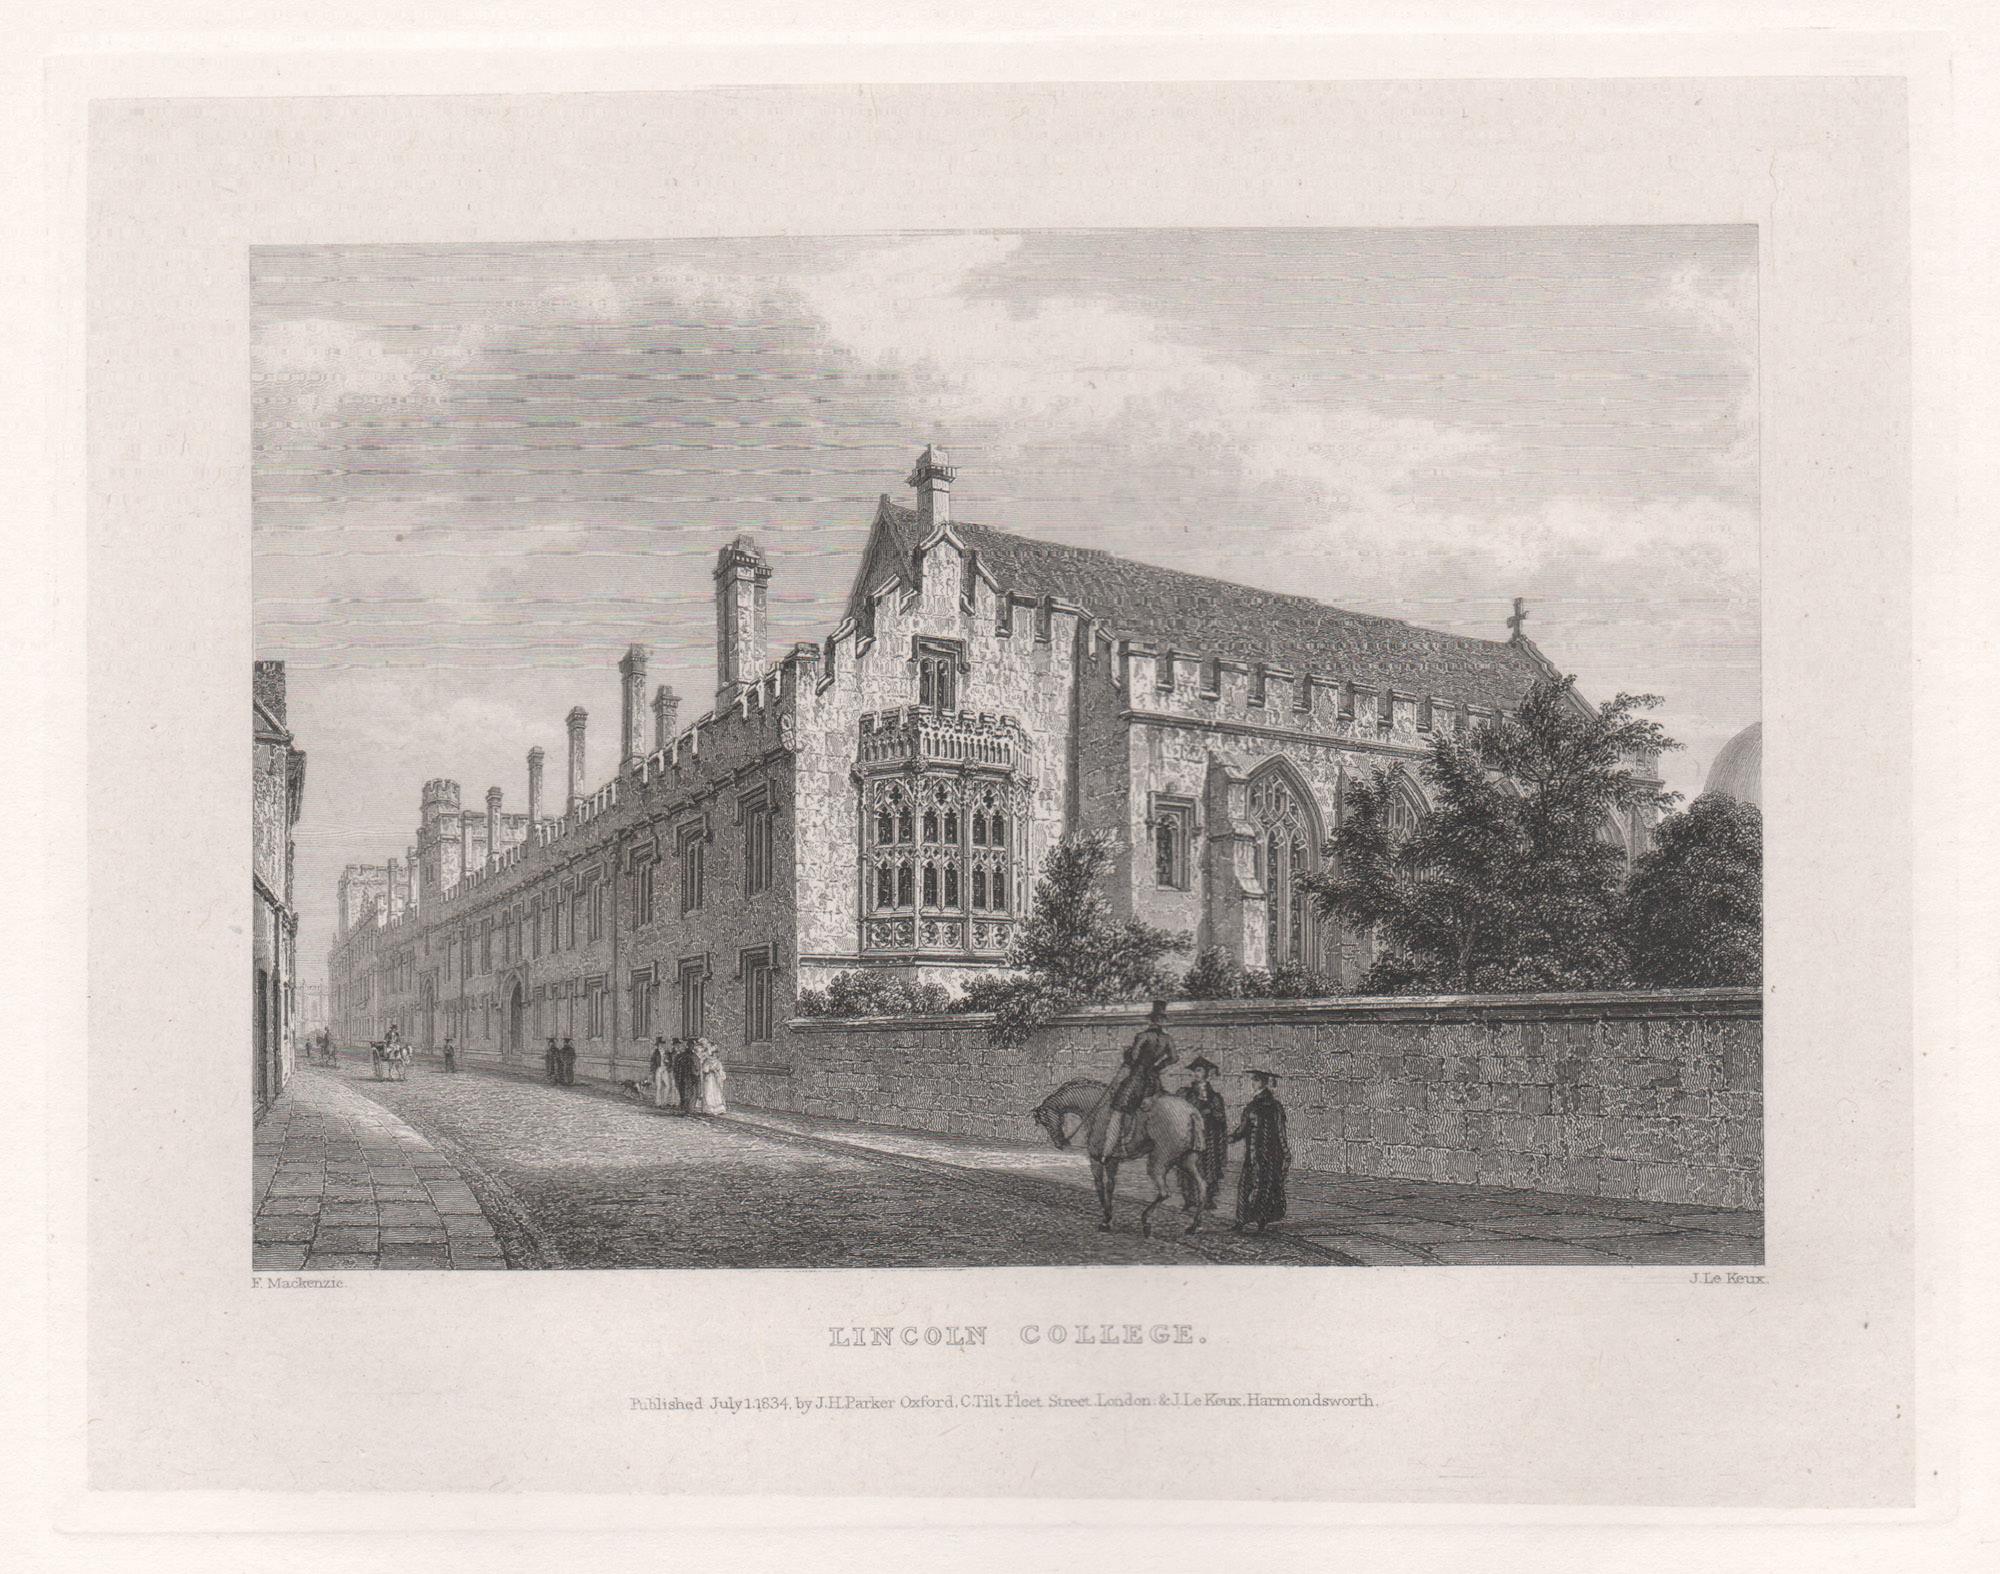 Lincoln College. Oxford University. Antique C19th engraving